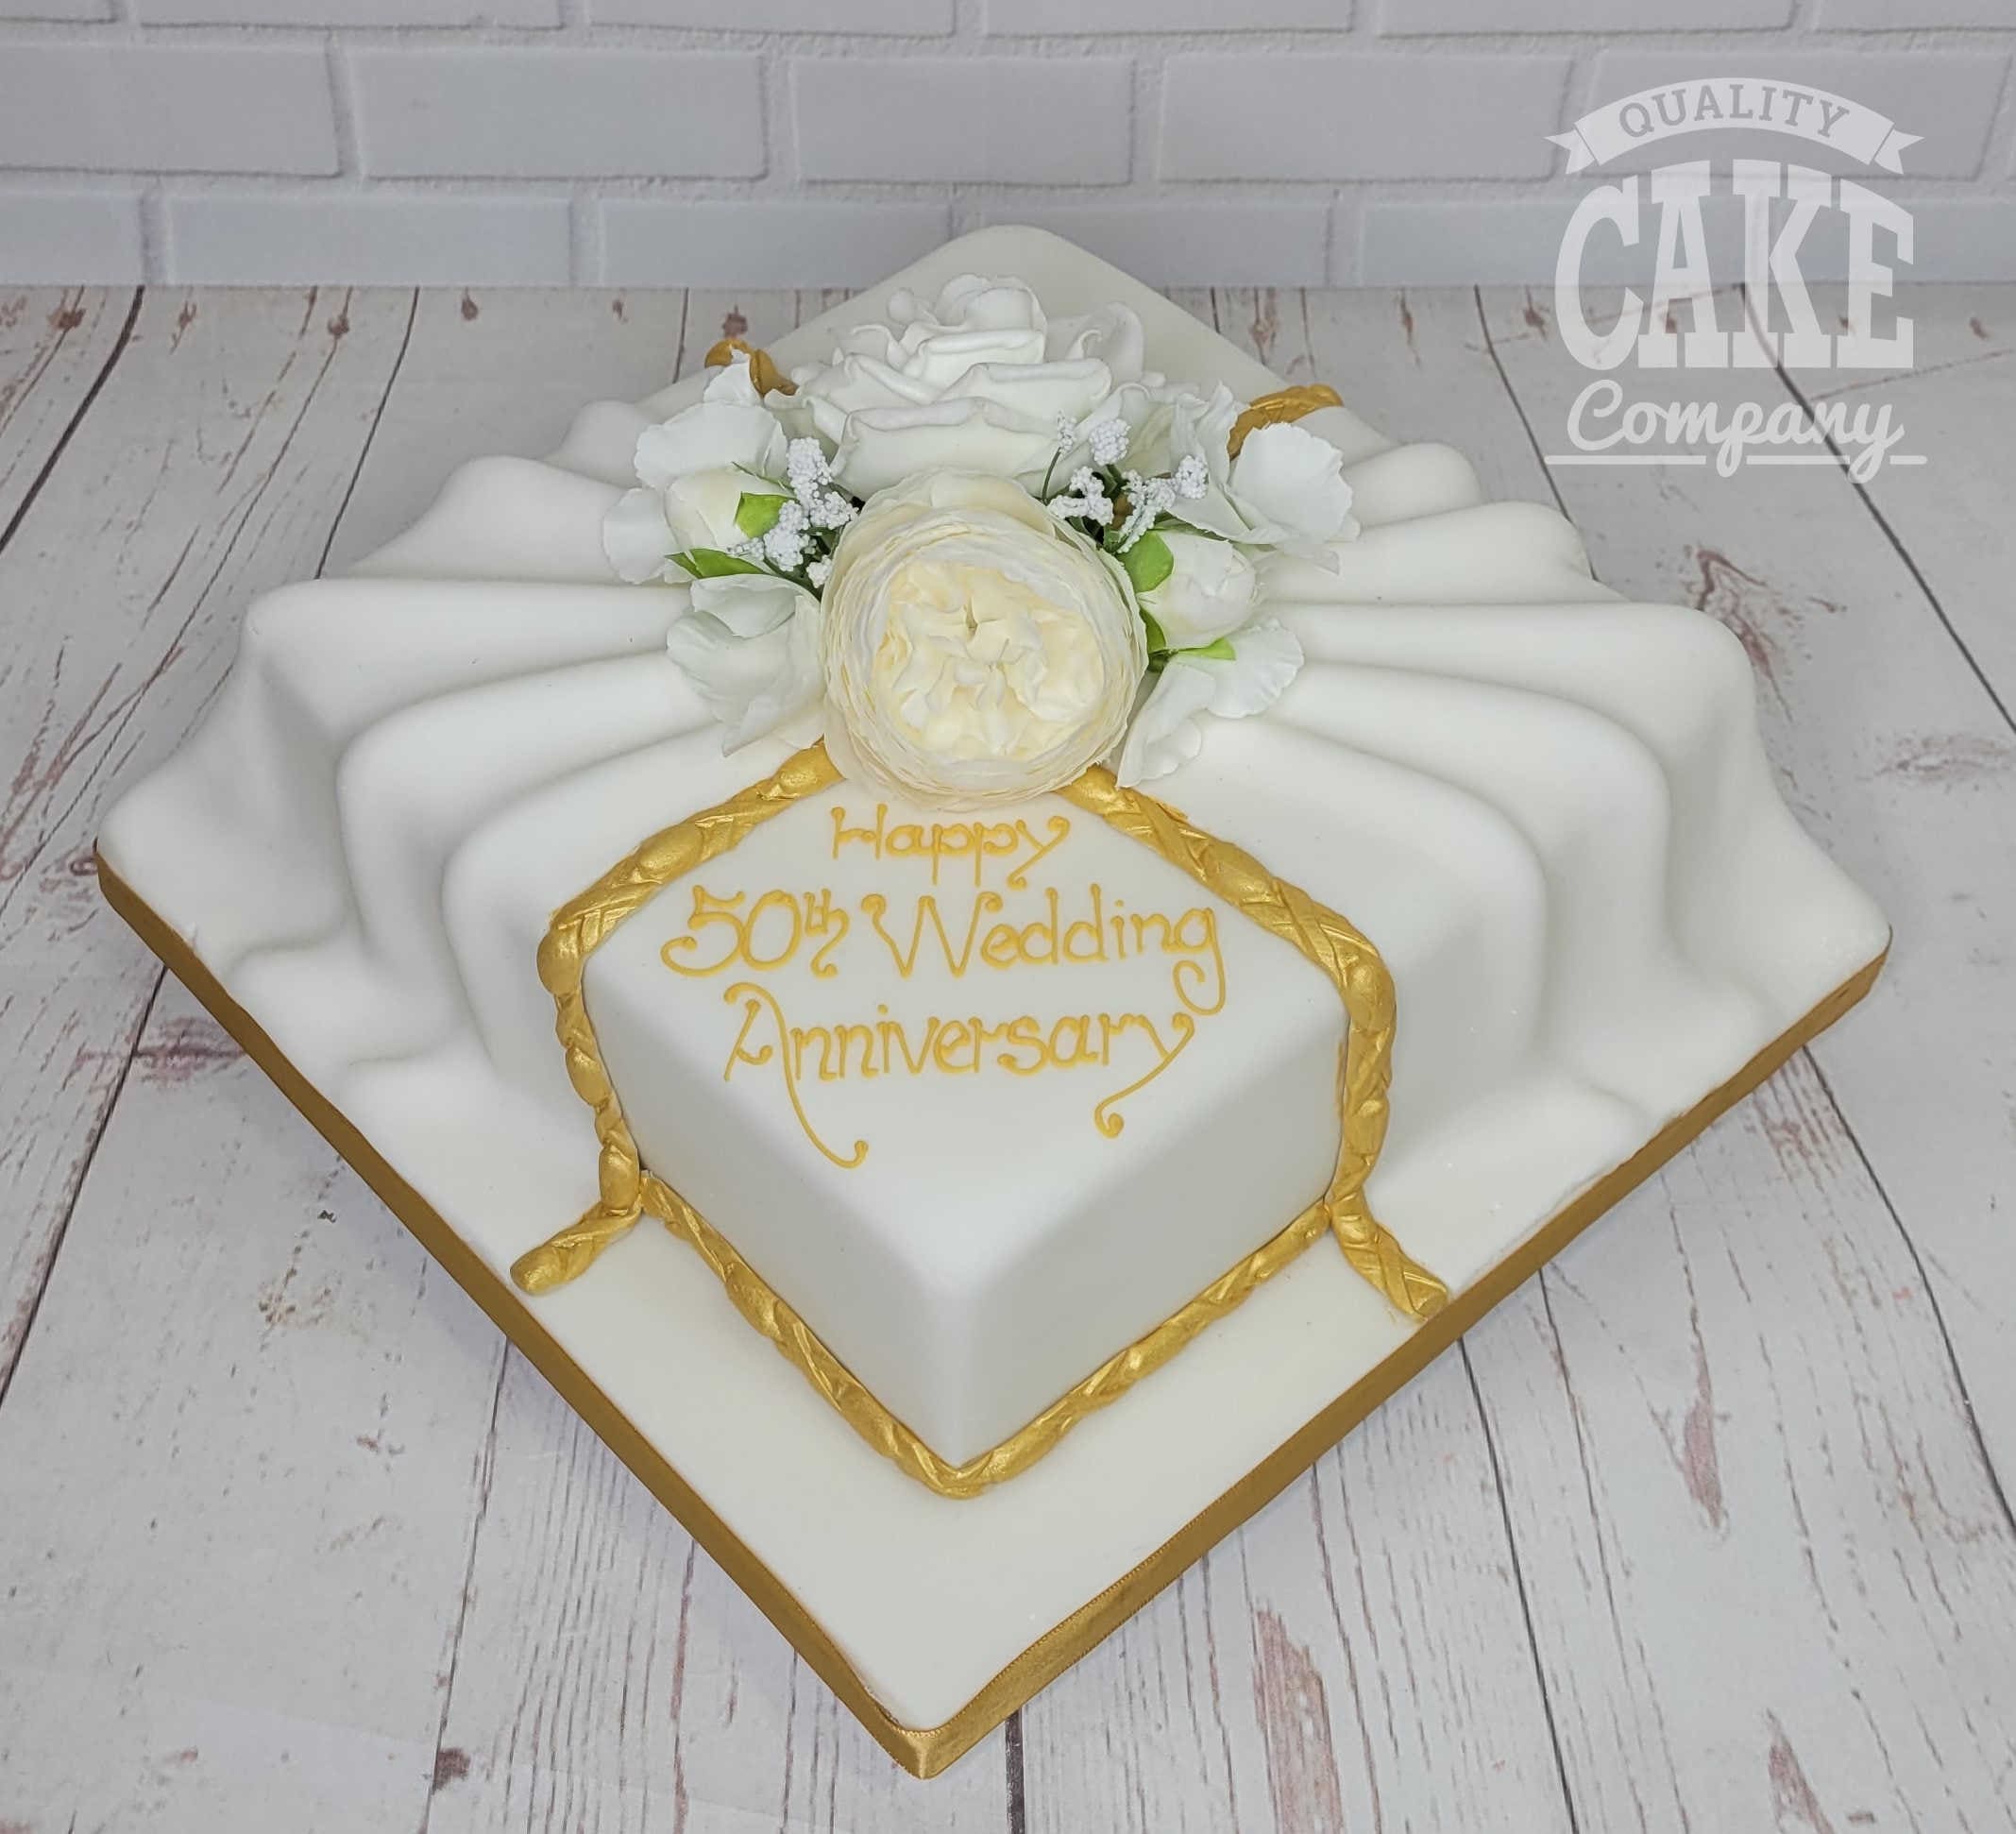 simple 25th anniversary cakes